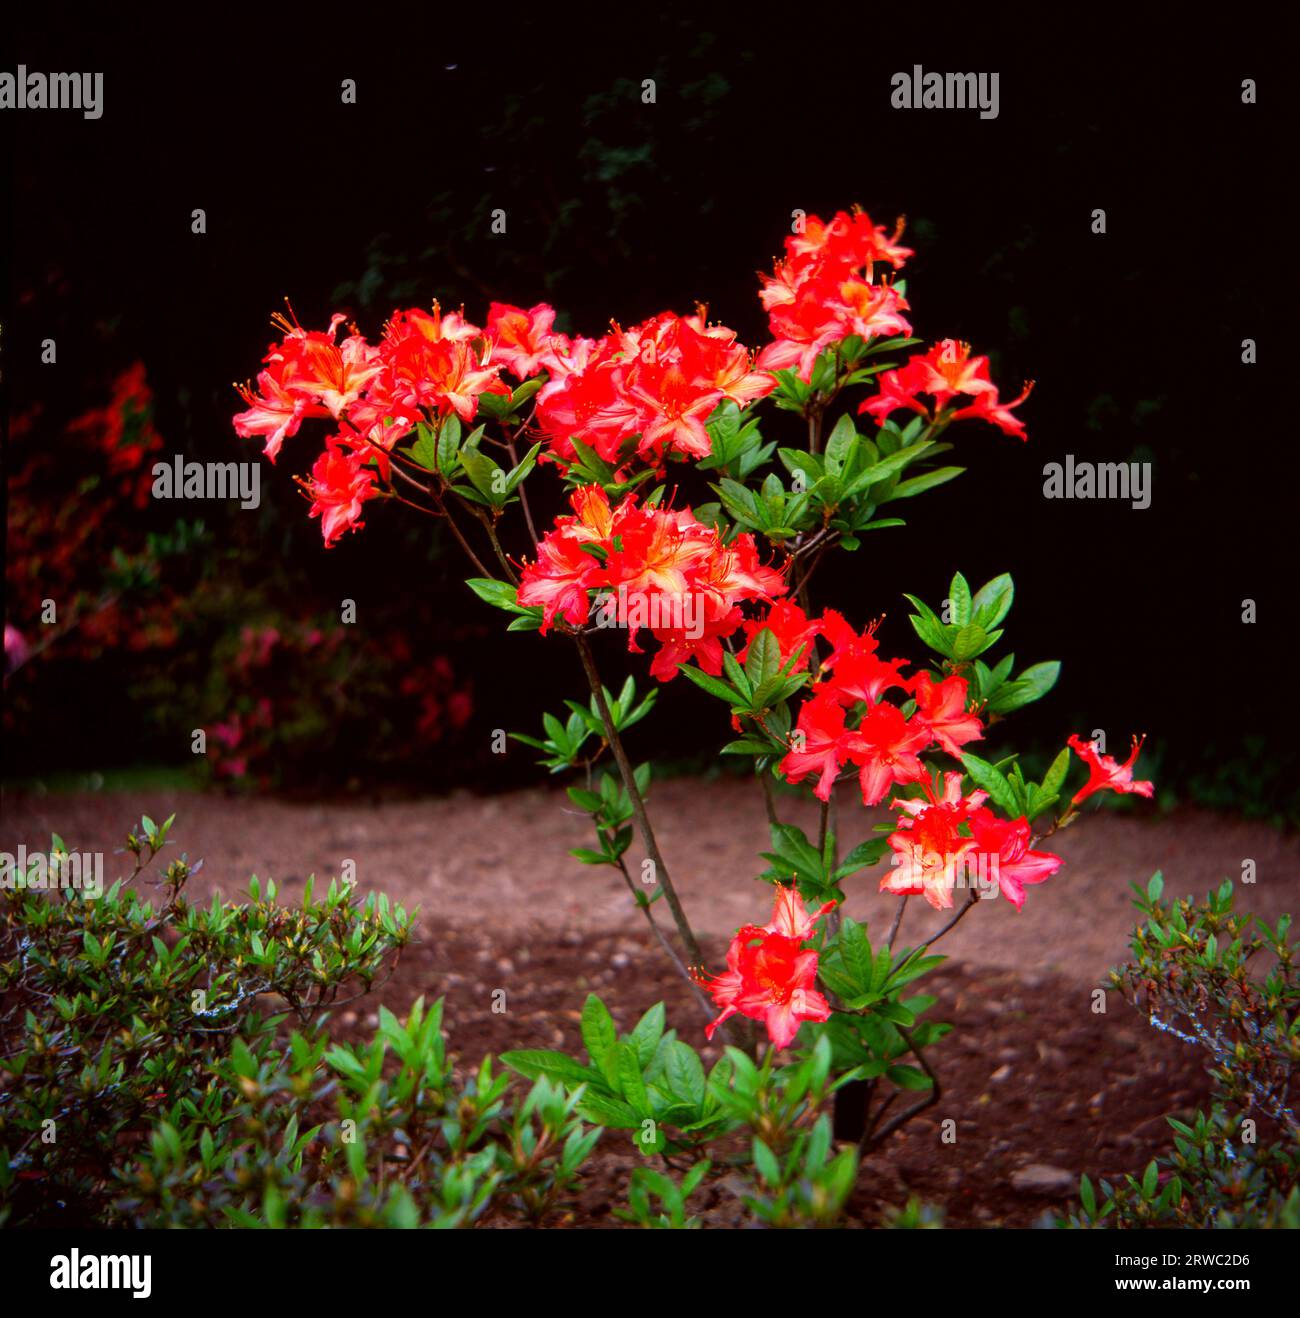 Rhododendron VENETIA flowering against a dark background Stock Photo